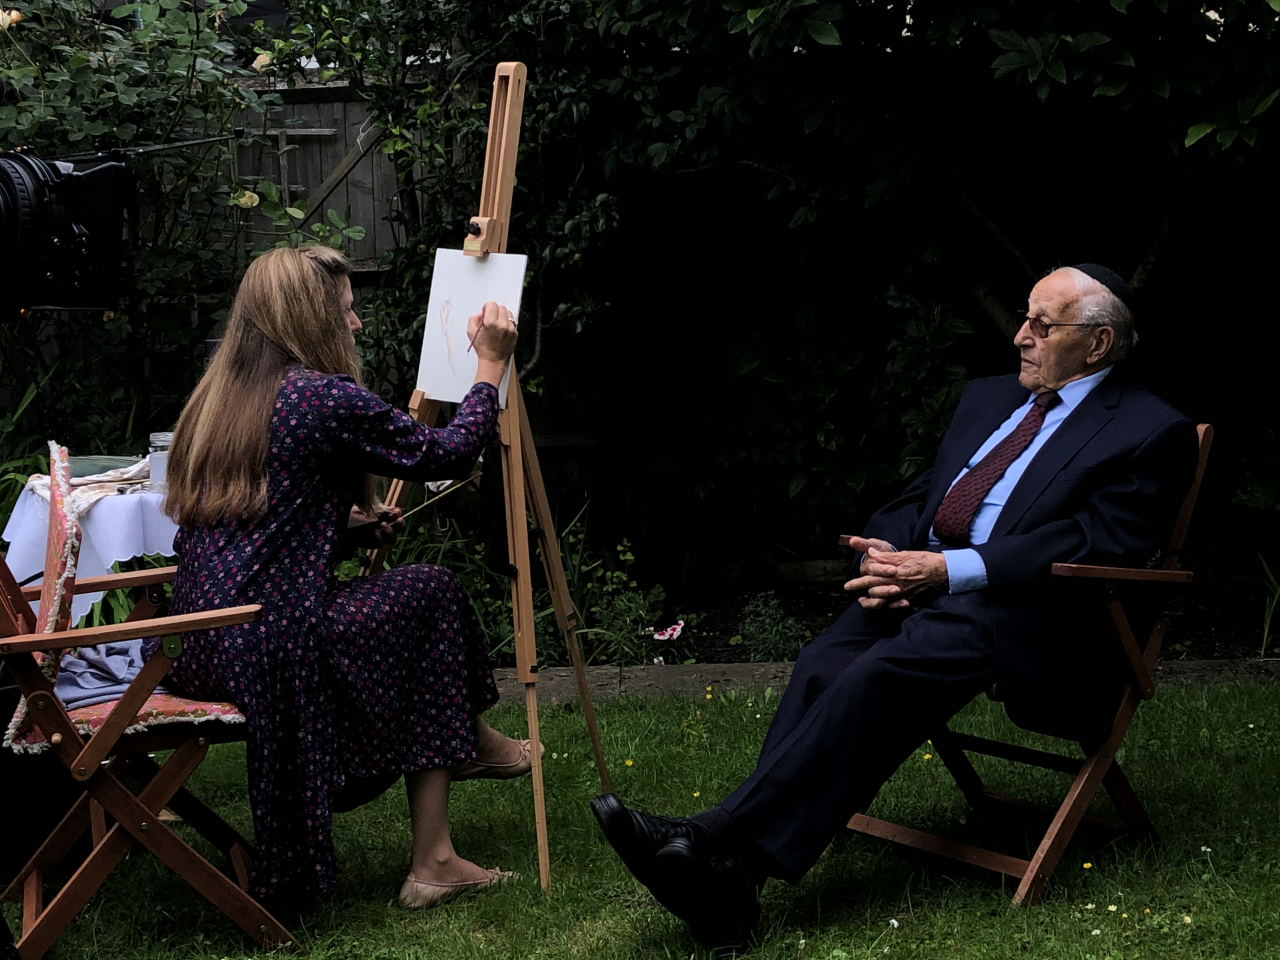 HRH The Prince of Wales commissions paintings of Holocaust survivors